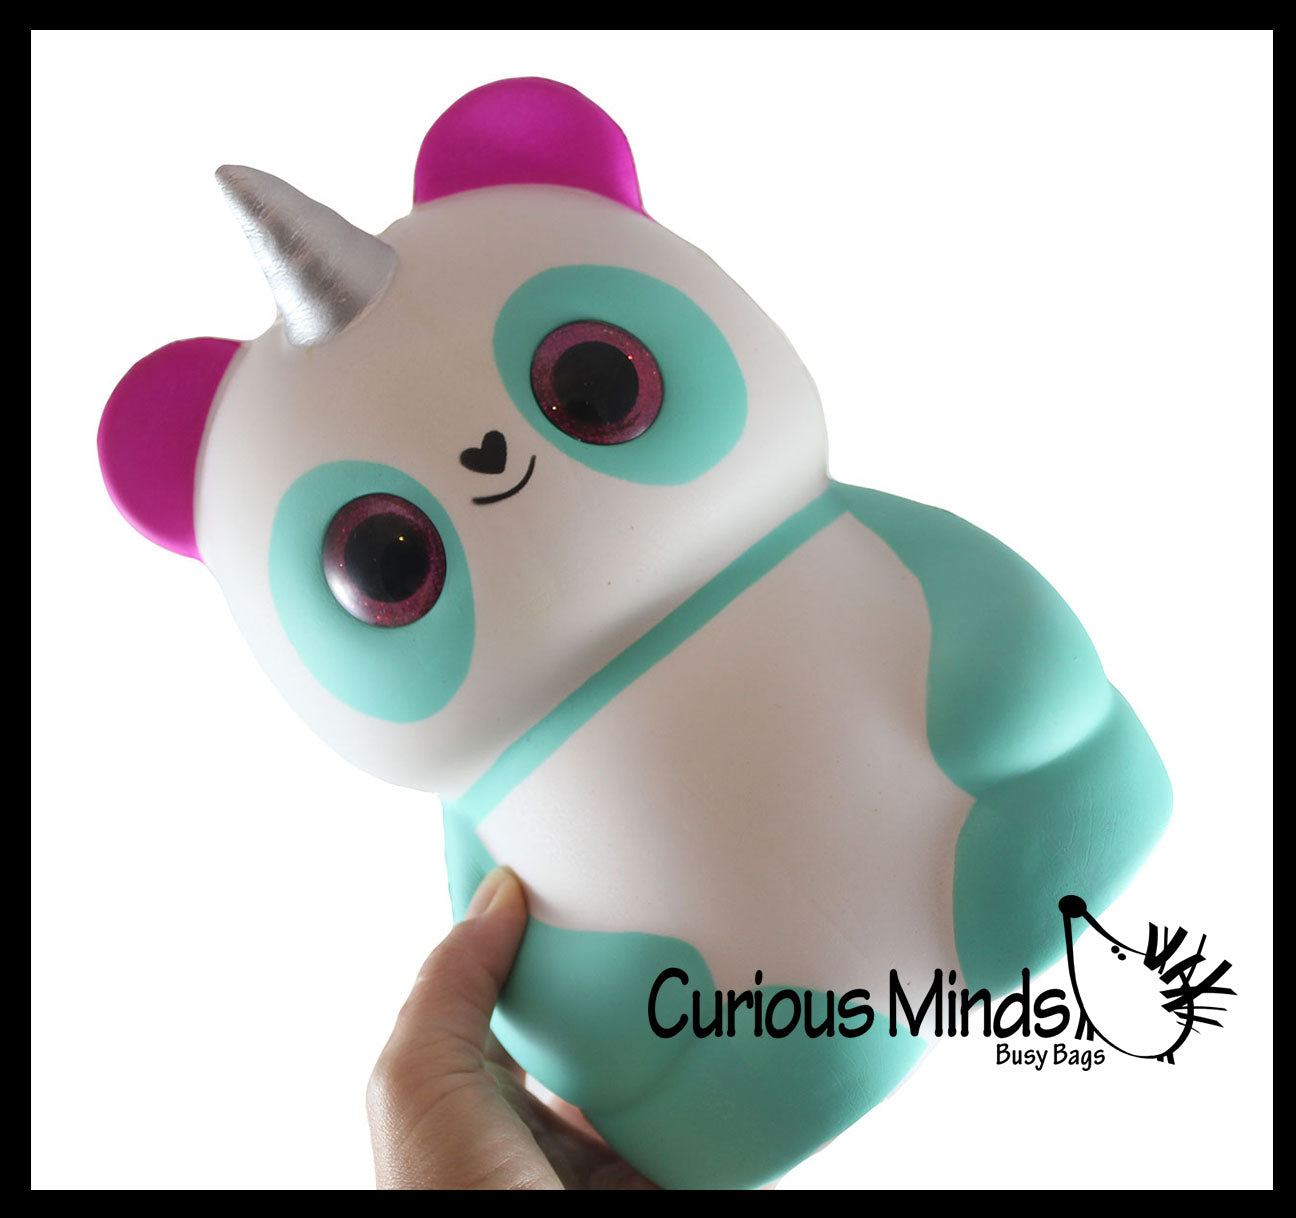 LAST CHANCE - LIMITED STOCK  - SALE - JUMBO Panda with Wings and Horn Squishy Slow Rise Foam Pet Animal Toy -  Scented Sensory, Stress, Fidget Toy Cute